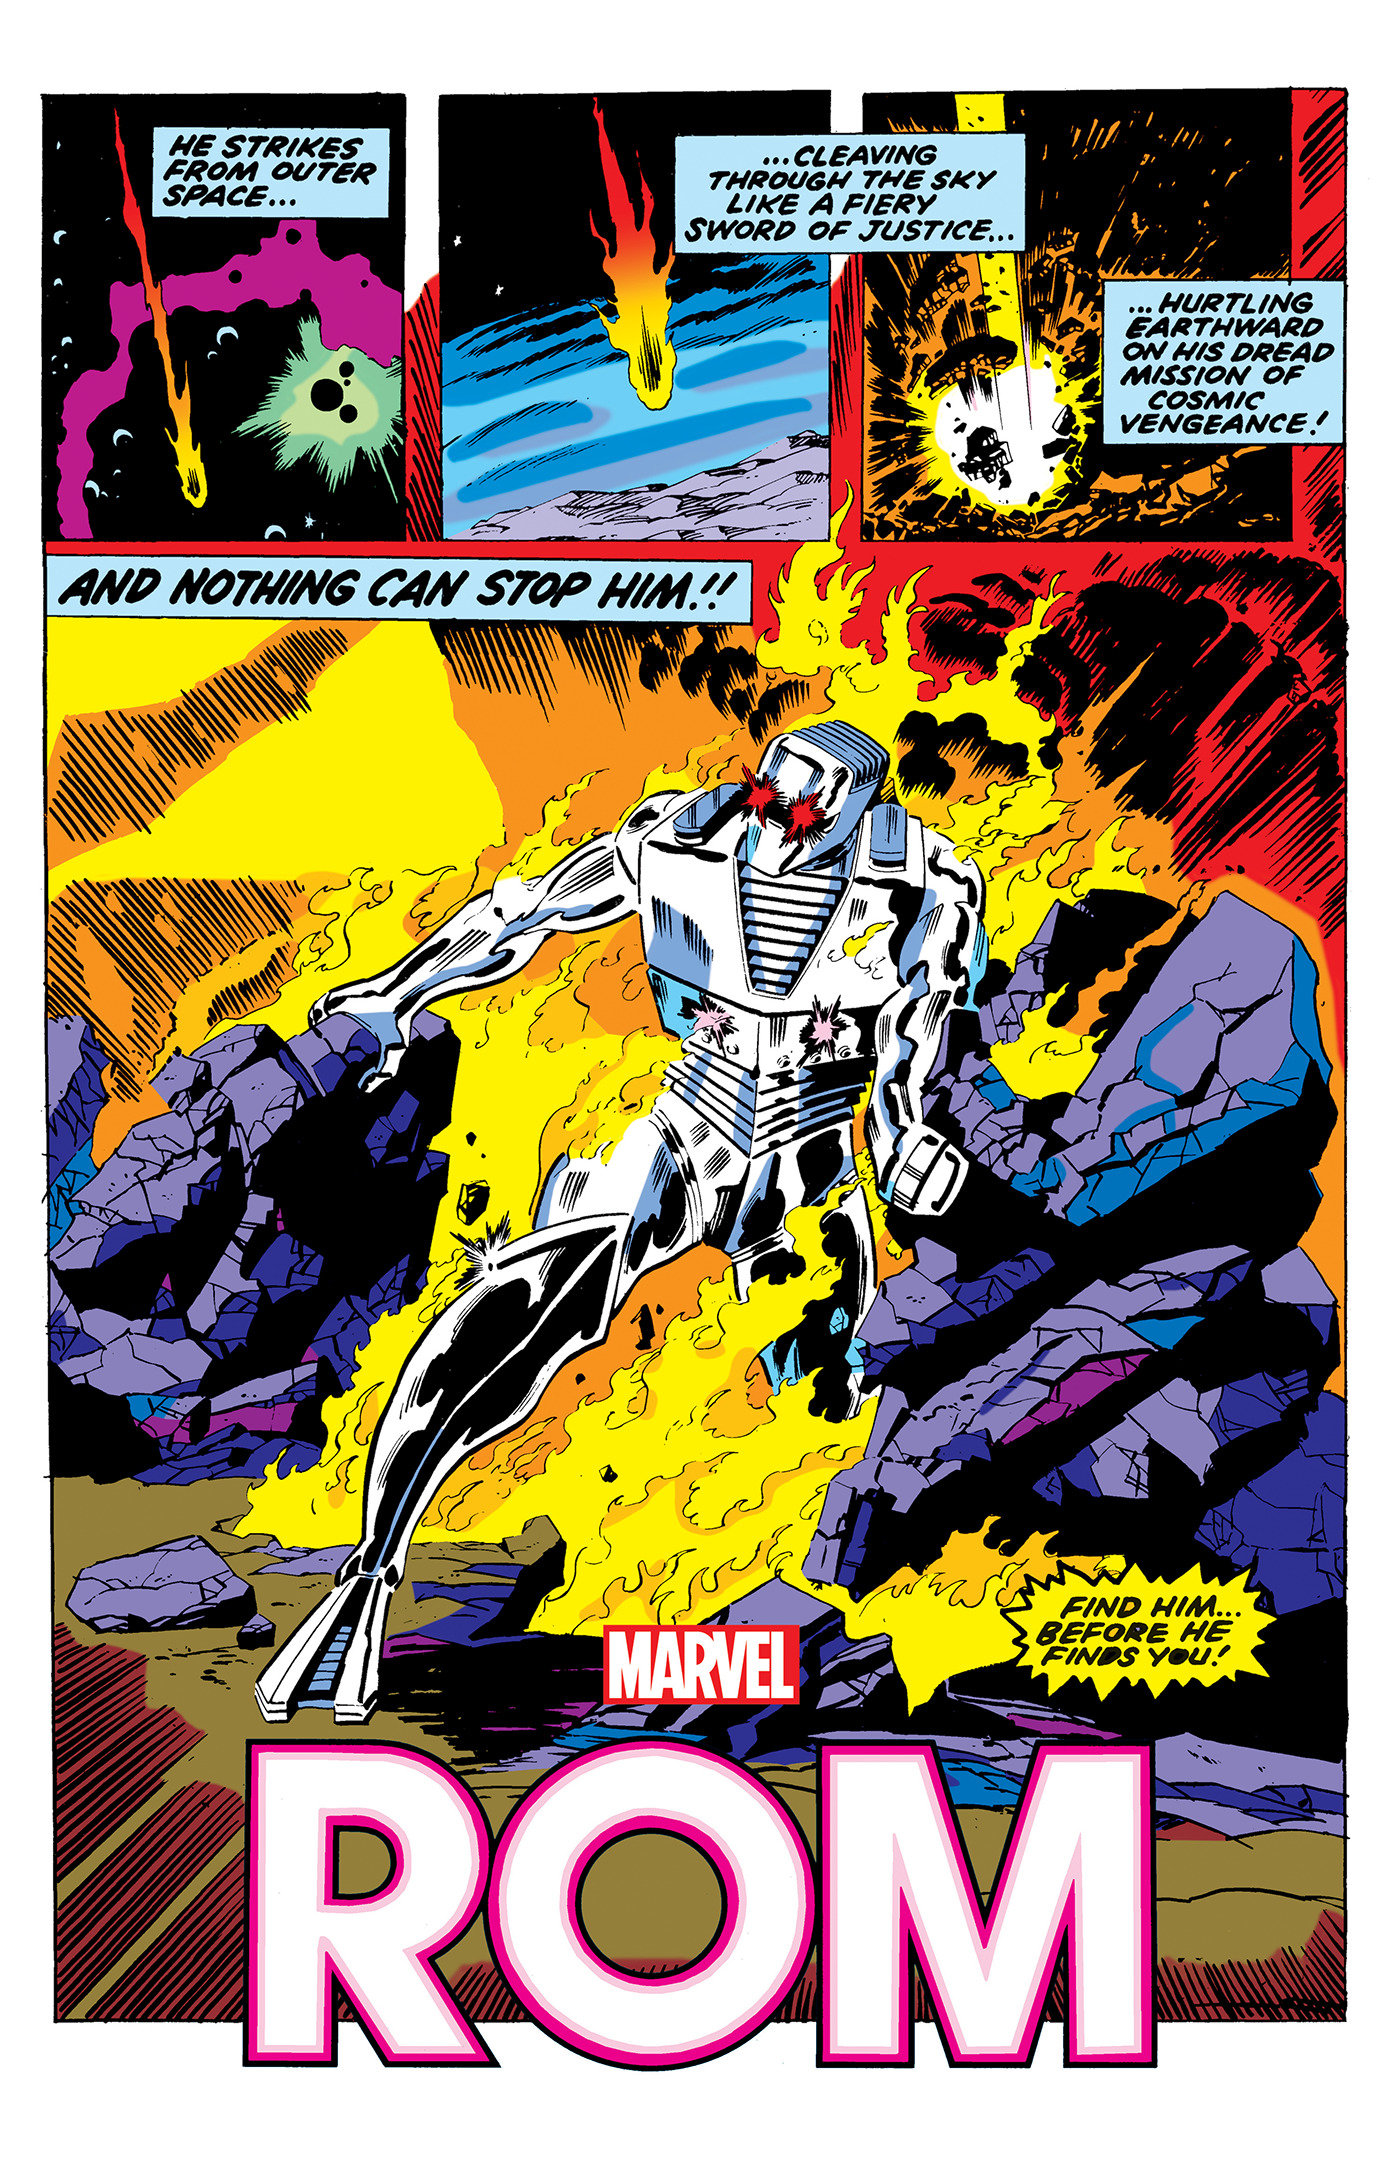 Rom: The Original Marvel Years Omnibus Hardcover Graphic Novel Volume 1 Sal Buscema Cover [Direct Market Edition]